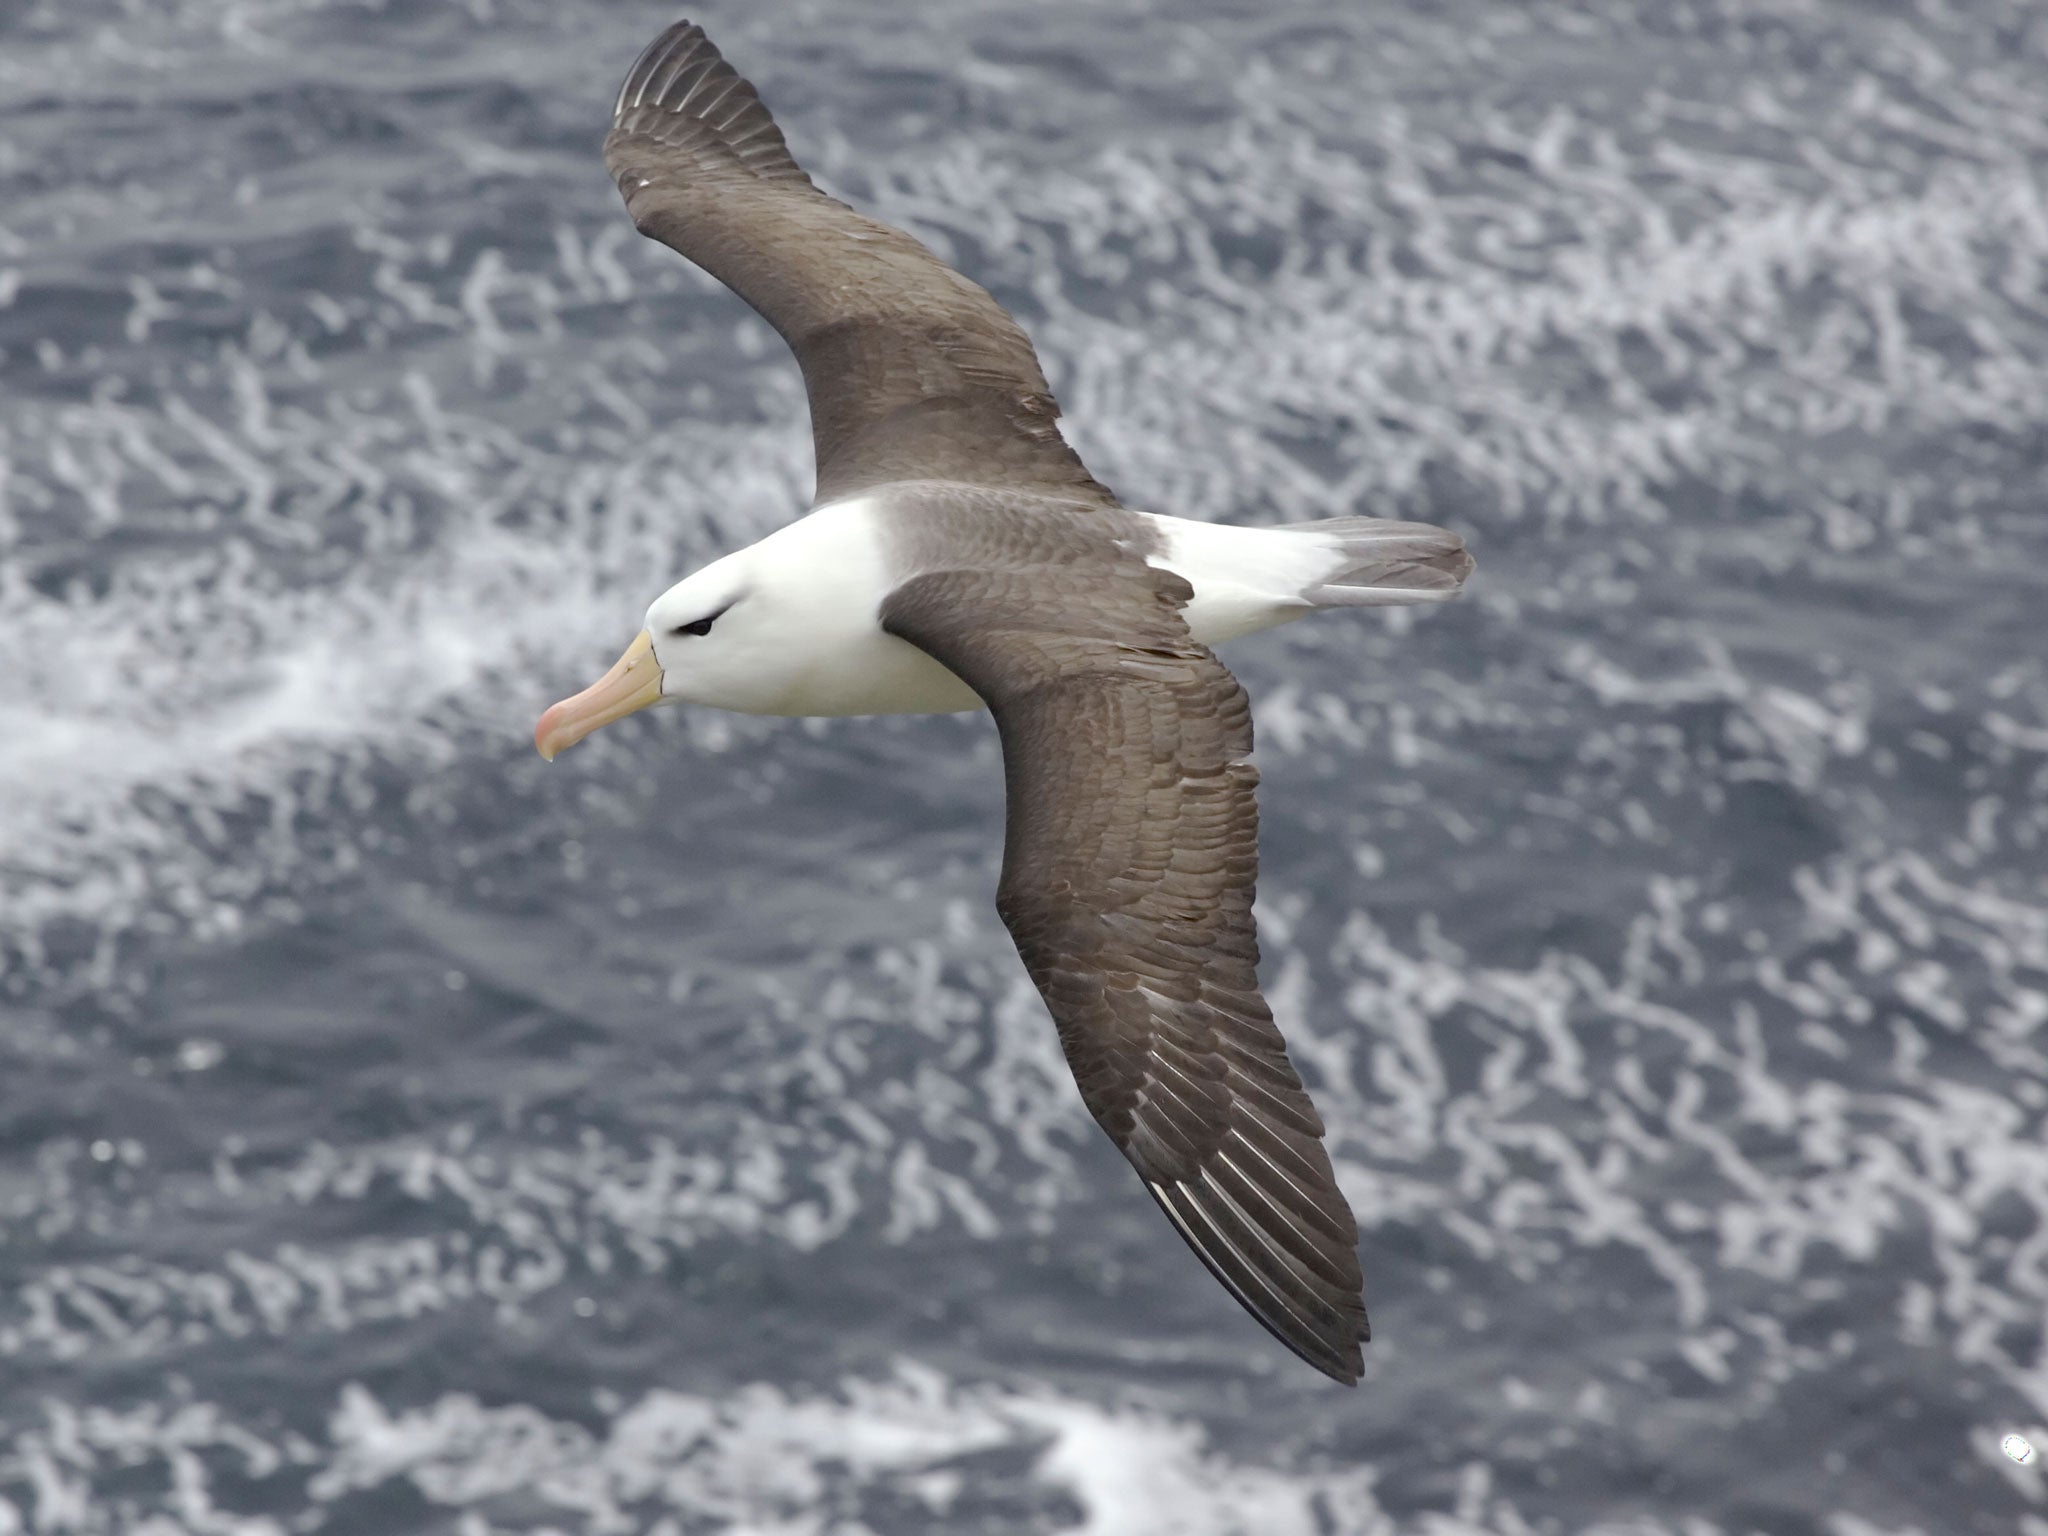 Scientists attached GPS trackers to a group of 16 albatrosses in the Indian Ocean. They recorded the birds flying at speeds of up to 67mph using a ‘dynamic soaring’ technique, which enables them to fly thousands of miles depending on the wind